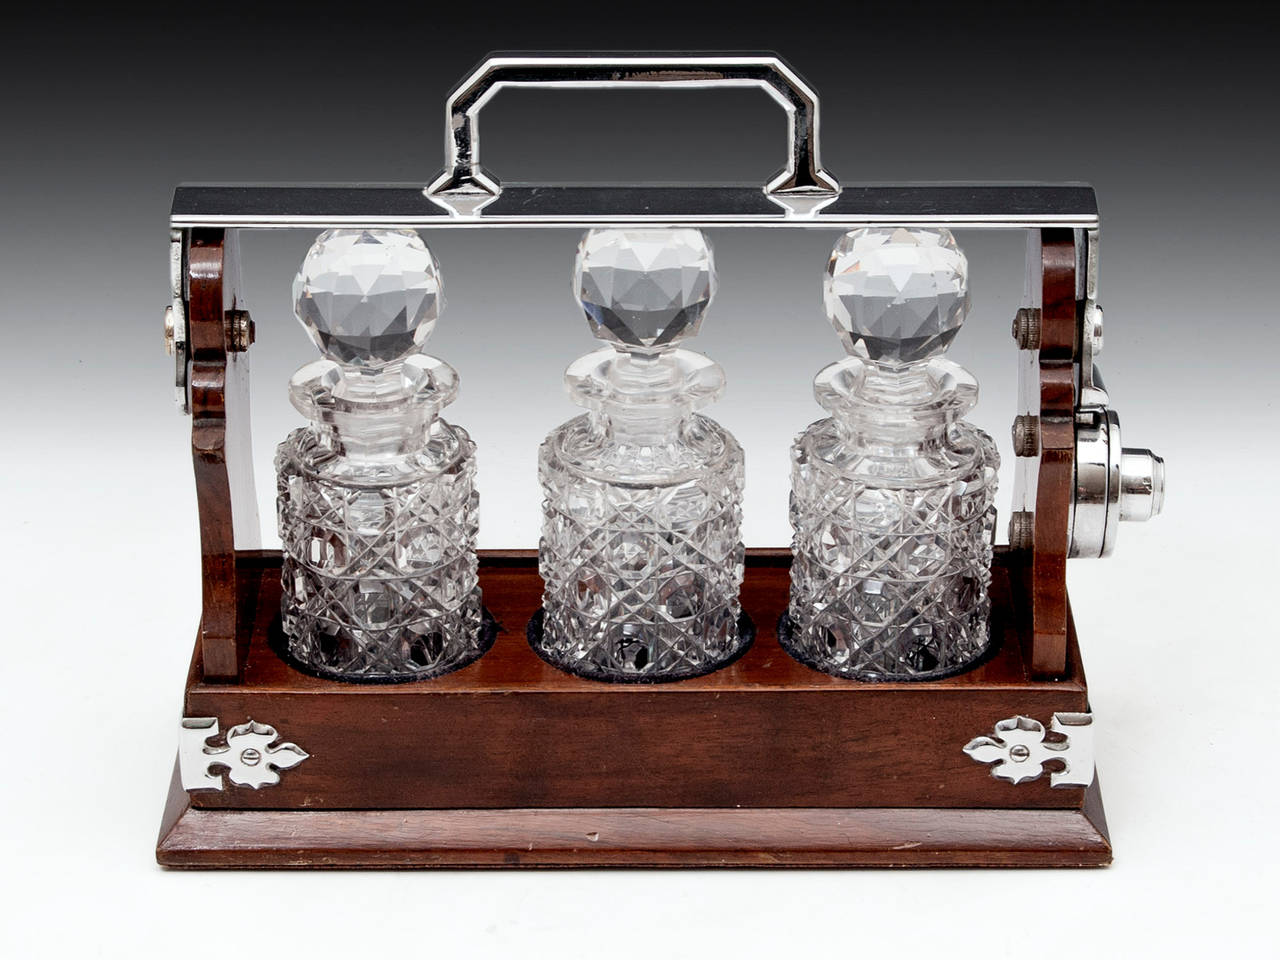 Miniature Betjemanns Walnut Tantalus. 
The miniature Tantalus has a silver plated carrying handle and decorative corners supports on all four sides. 

The Tantalus contains three superb round lead crystal hobnail cut glass decanters with faceted